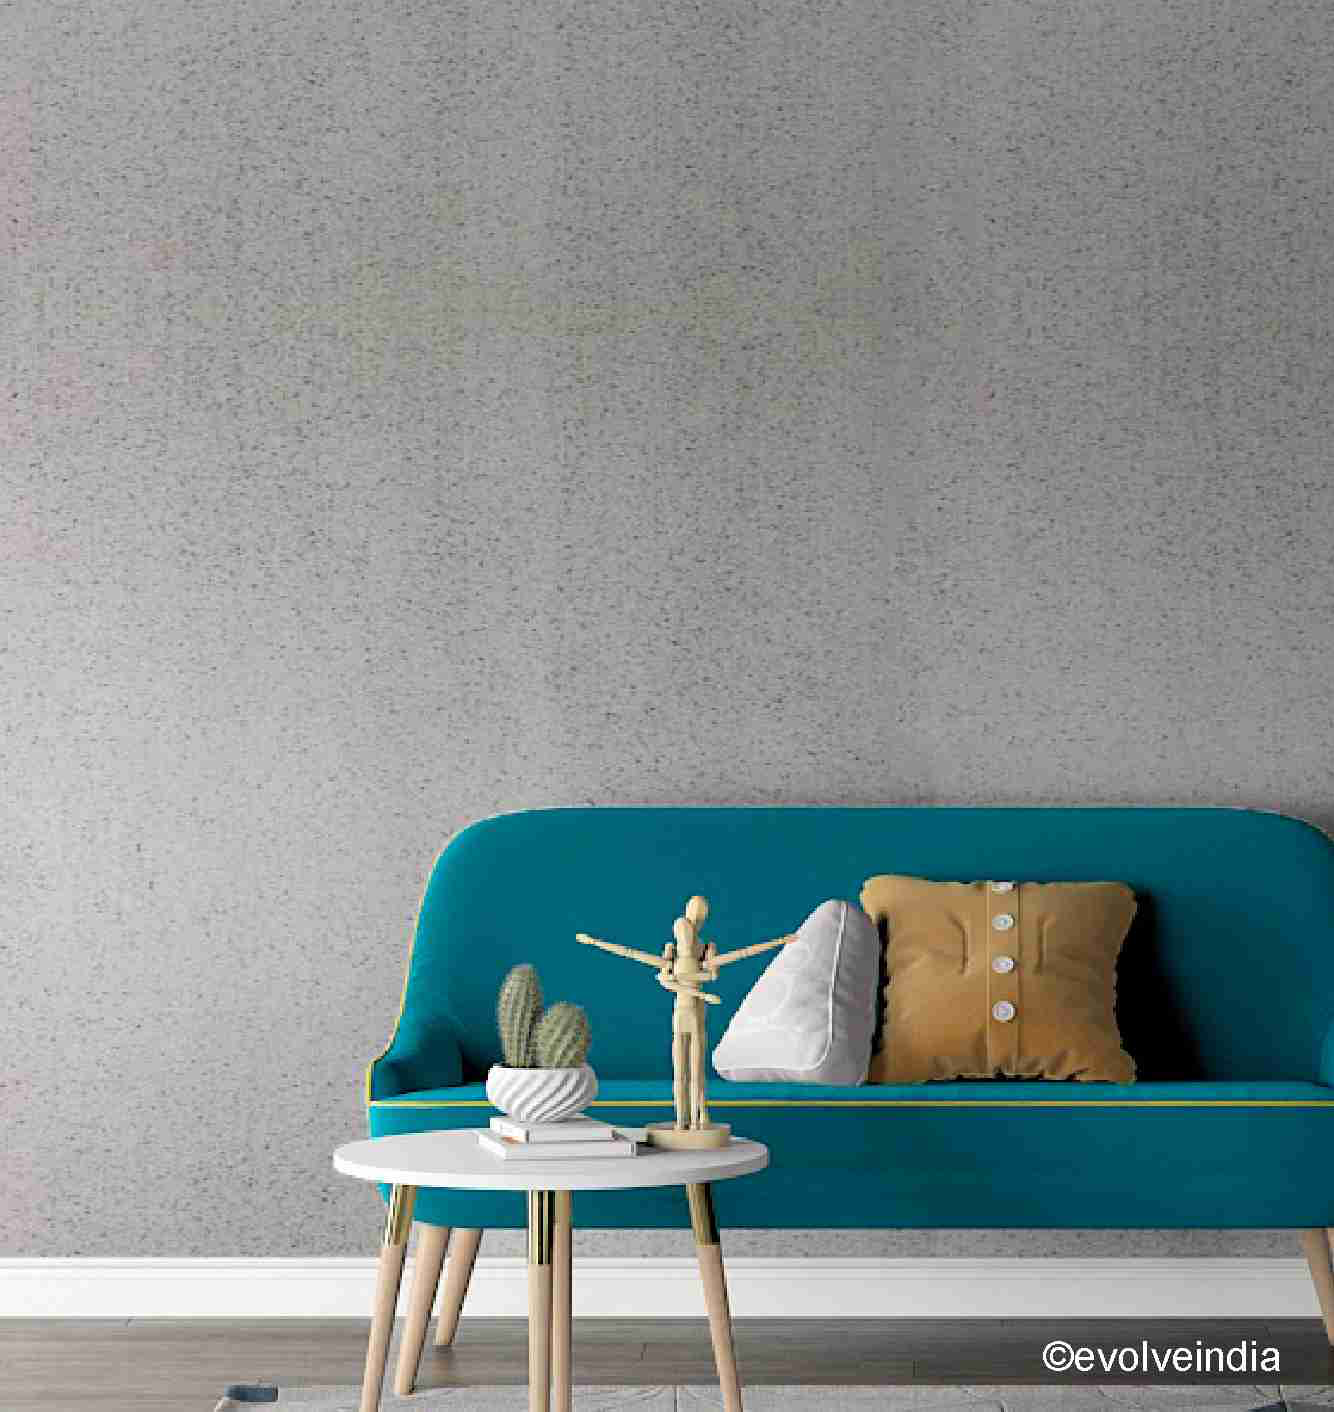 Grey concrete wall with a teal sofa in front